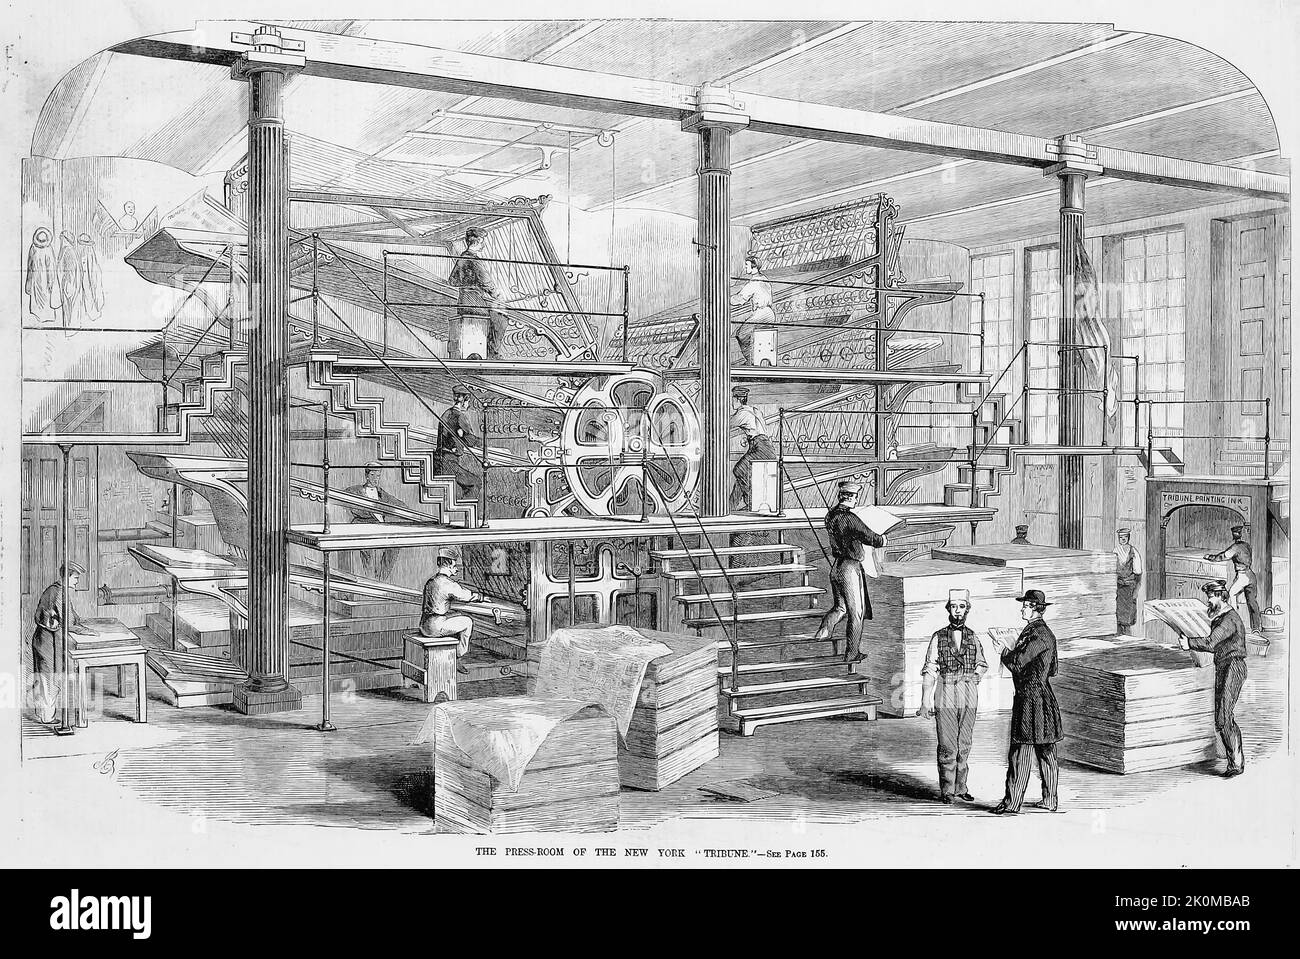 The press room of the New York Tribune newspaper, July 1861. 19th century American Civil War illustration from Frank Leslie's Illustrated Newspaper Stock Photo